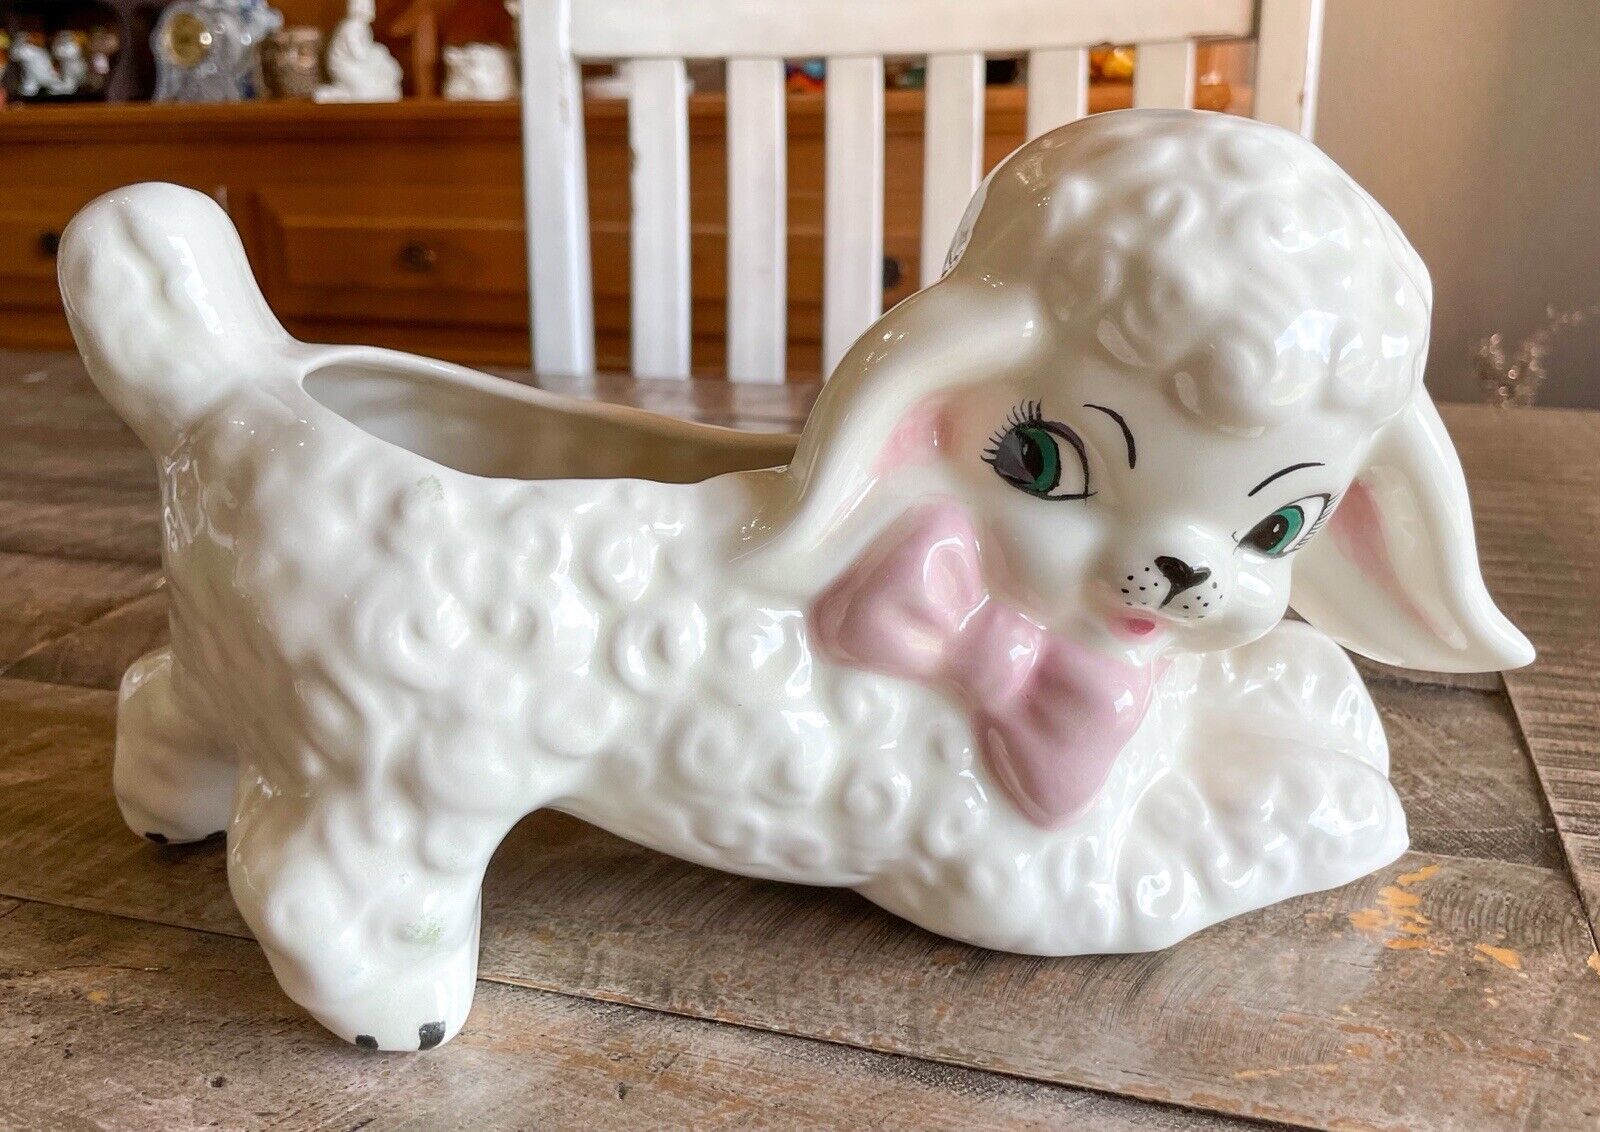 Vintage White Lamb Planter Figurine With Pink Bow Large 10.5” X 6.5”